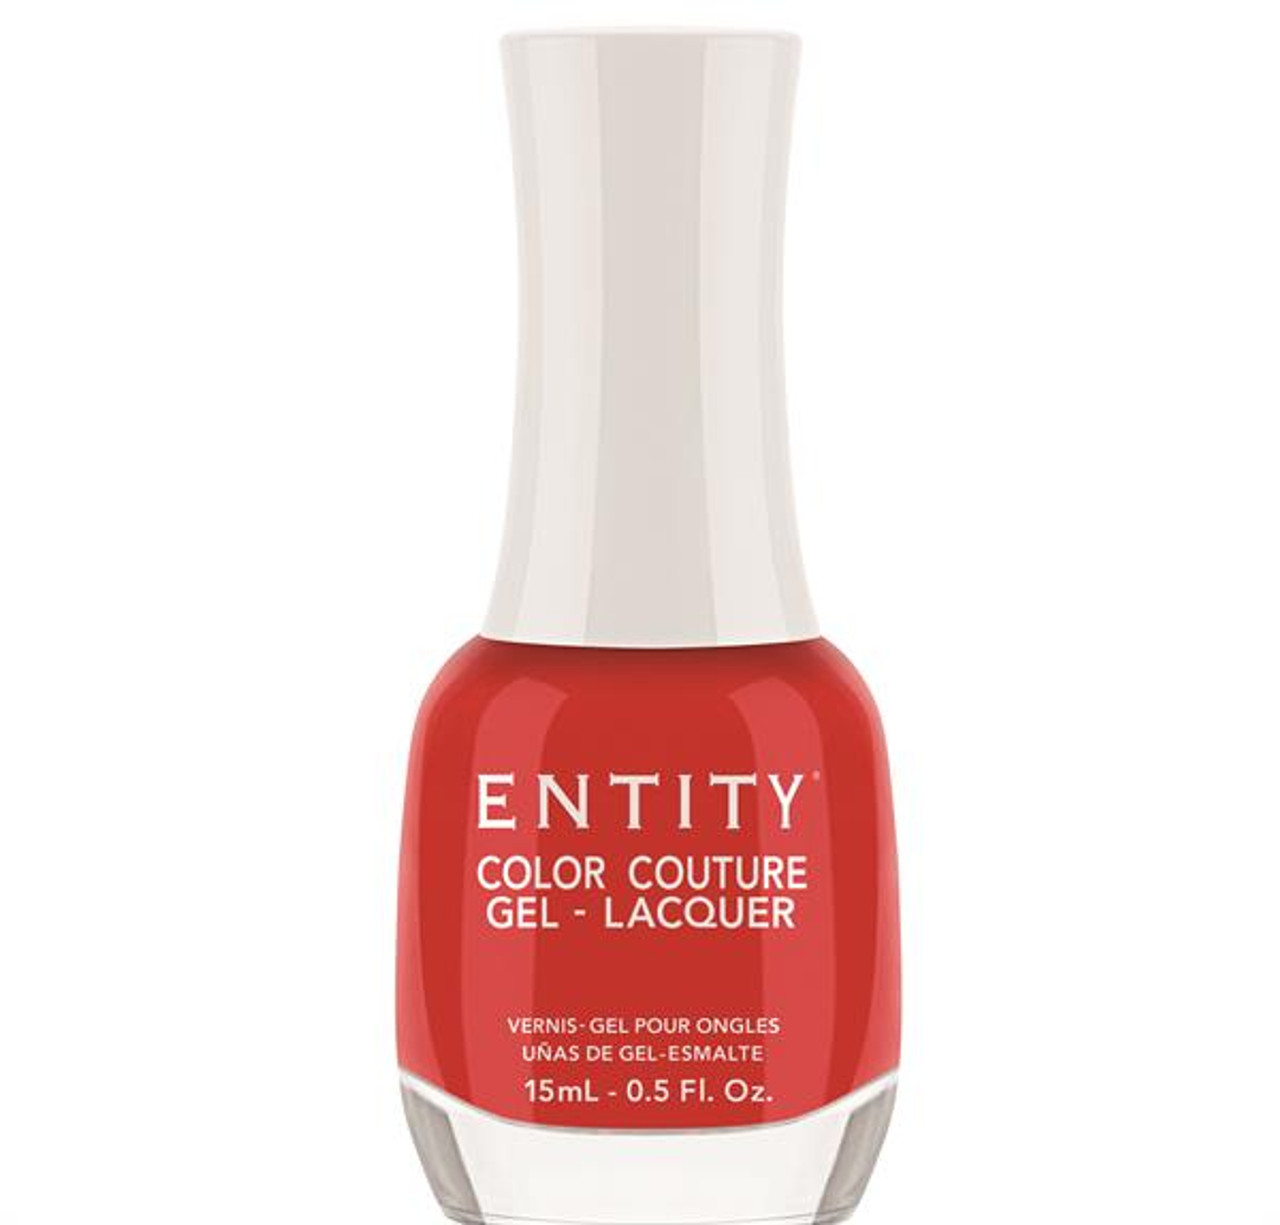 Entity Color Couture Gel-Lacquer A-VERY BRIGHT RED DRESS - 15 mL / .5 fl oz